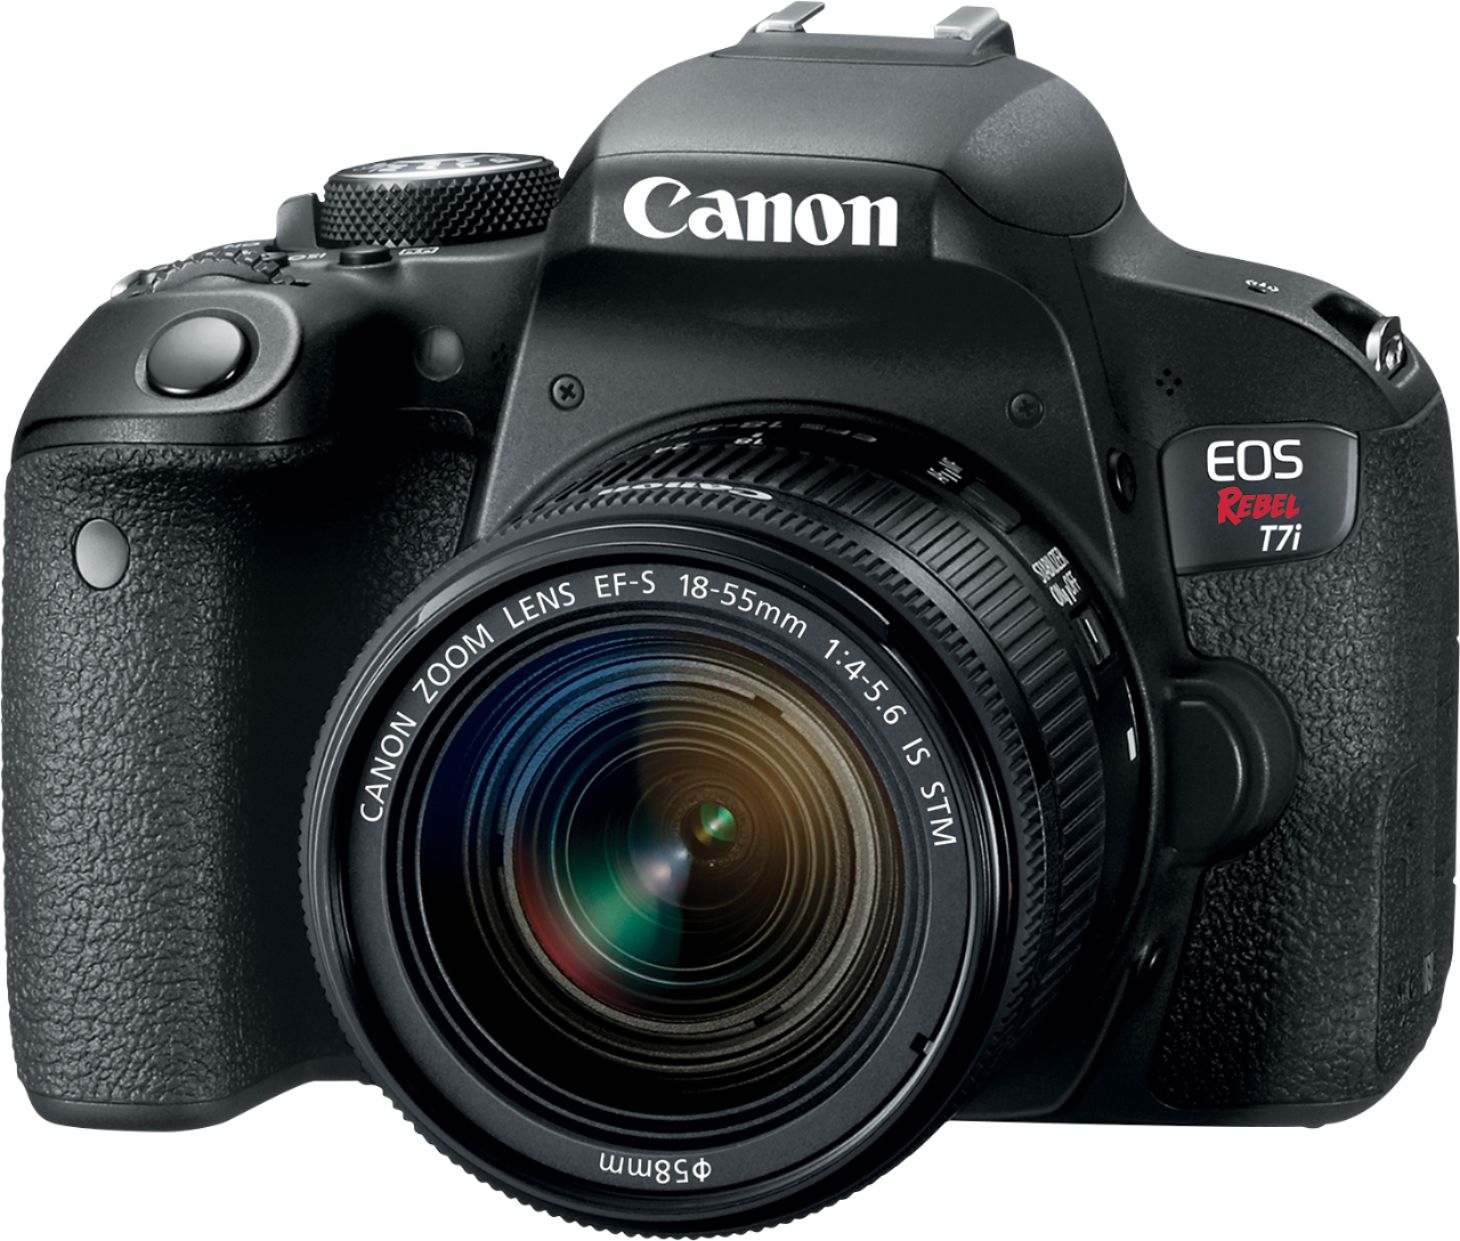 Canon EOS Rebel T7i DSLR Camera with EF-S 18-55mm IS STM